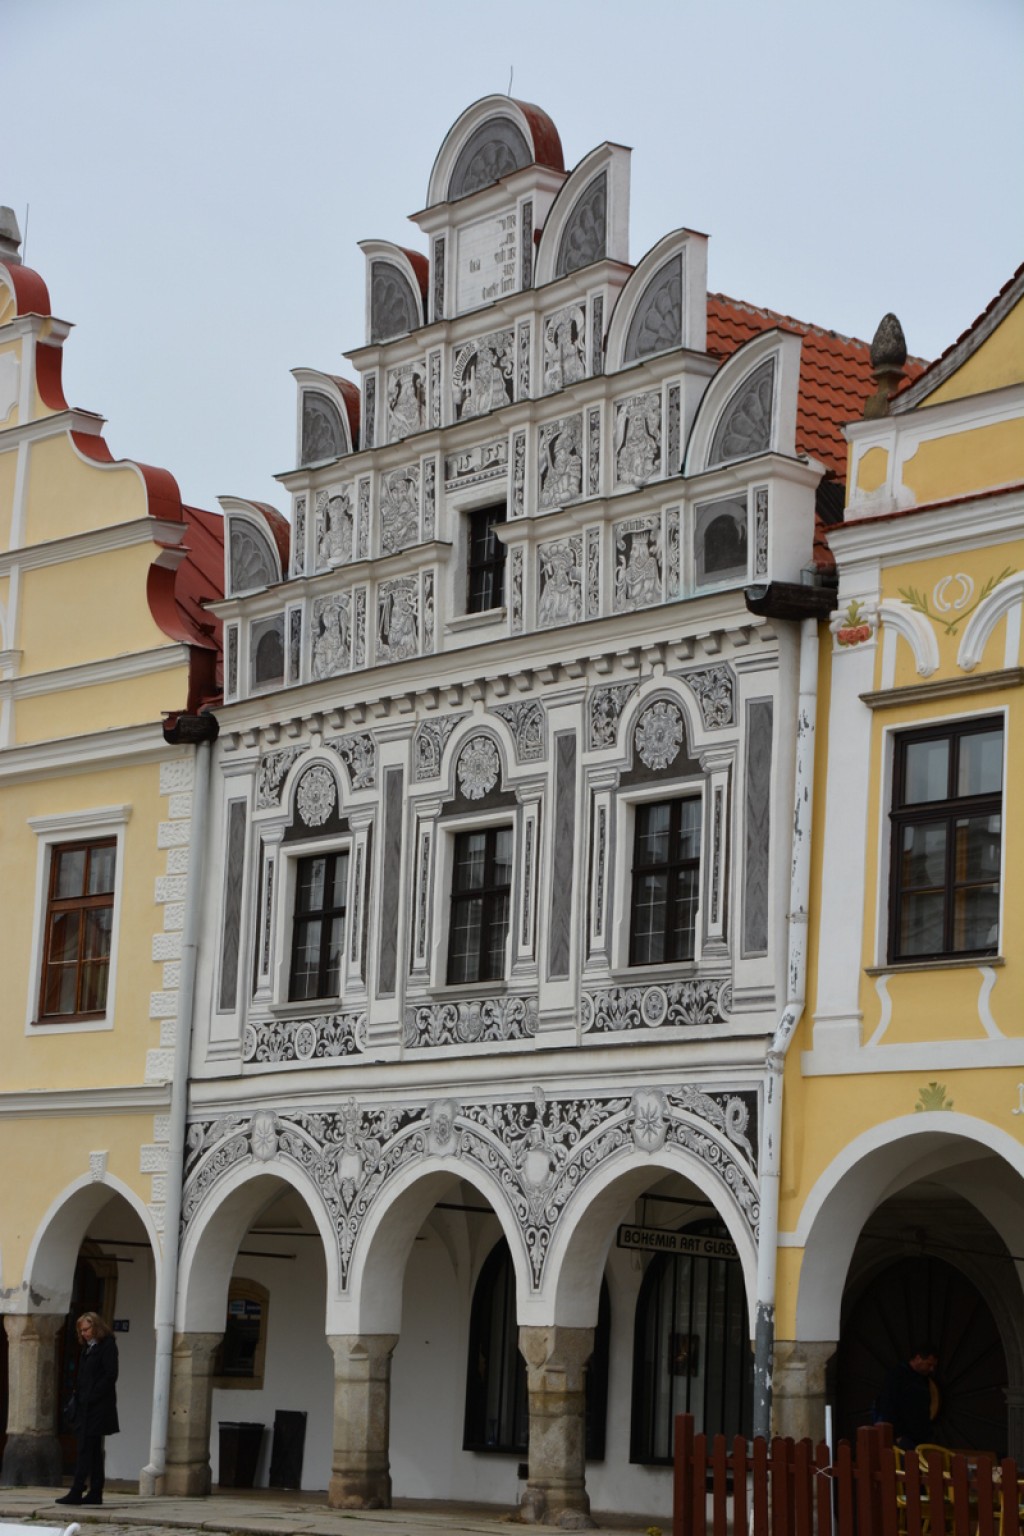 We stopped briefly in Telc - what a magical little town. The square is fabulous, with its mulitcolored houses, and the old town is surrounded by fish ponds. 